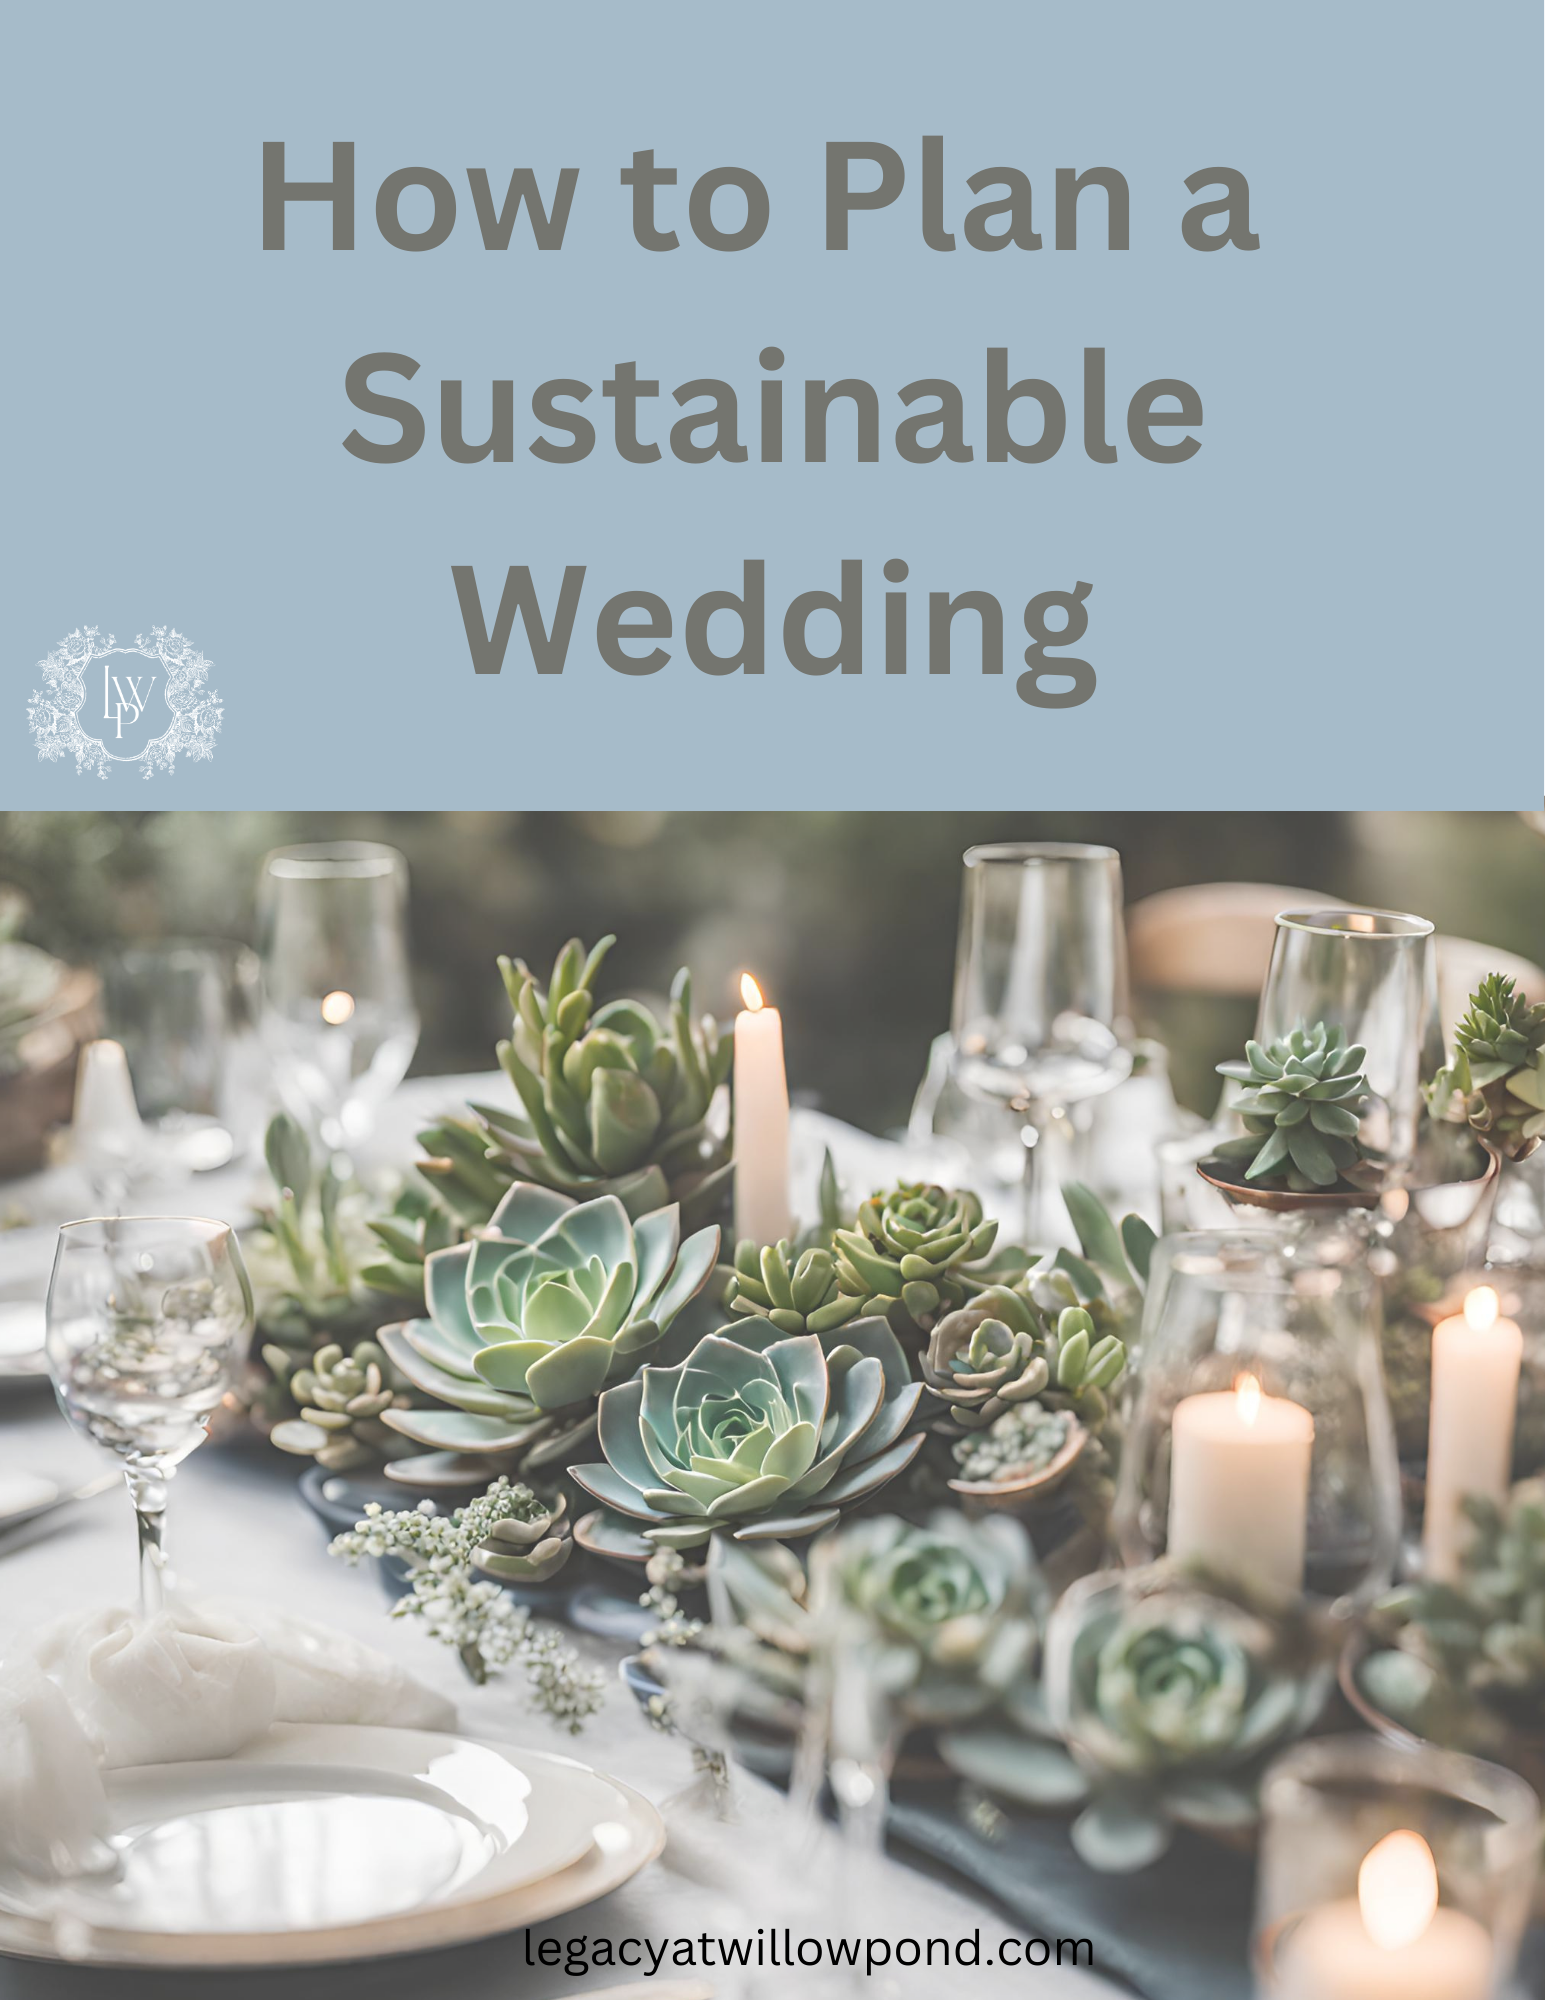 knowing how to plan a sustainable wedding doesn't have to be difficult. Using succulents is a beautiful way for decoration as well as eco-friendly favors.